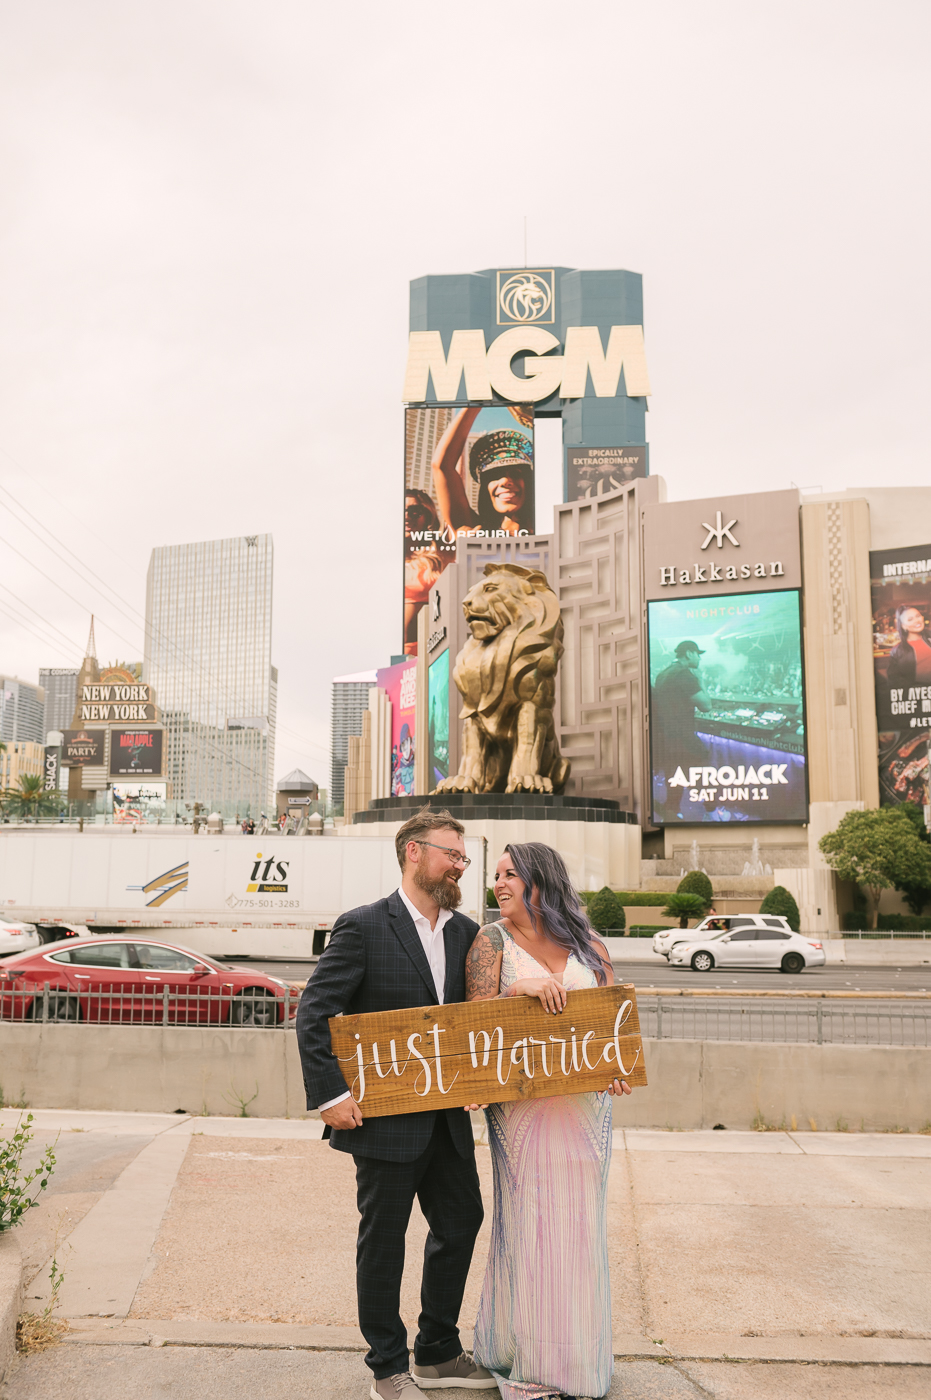 Bride and groom holding up Just Married sign during their wedding shoot arranged by Elopement Las Vegas